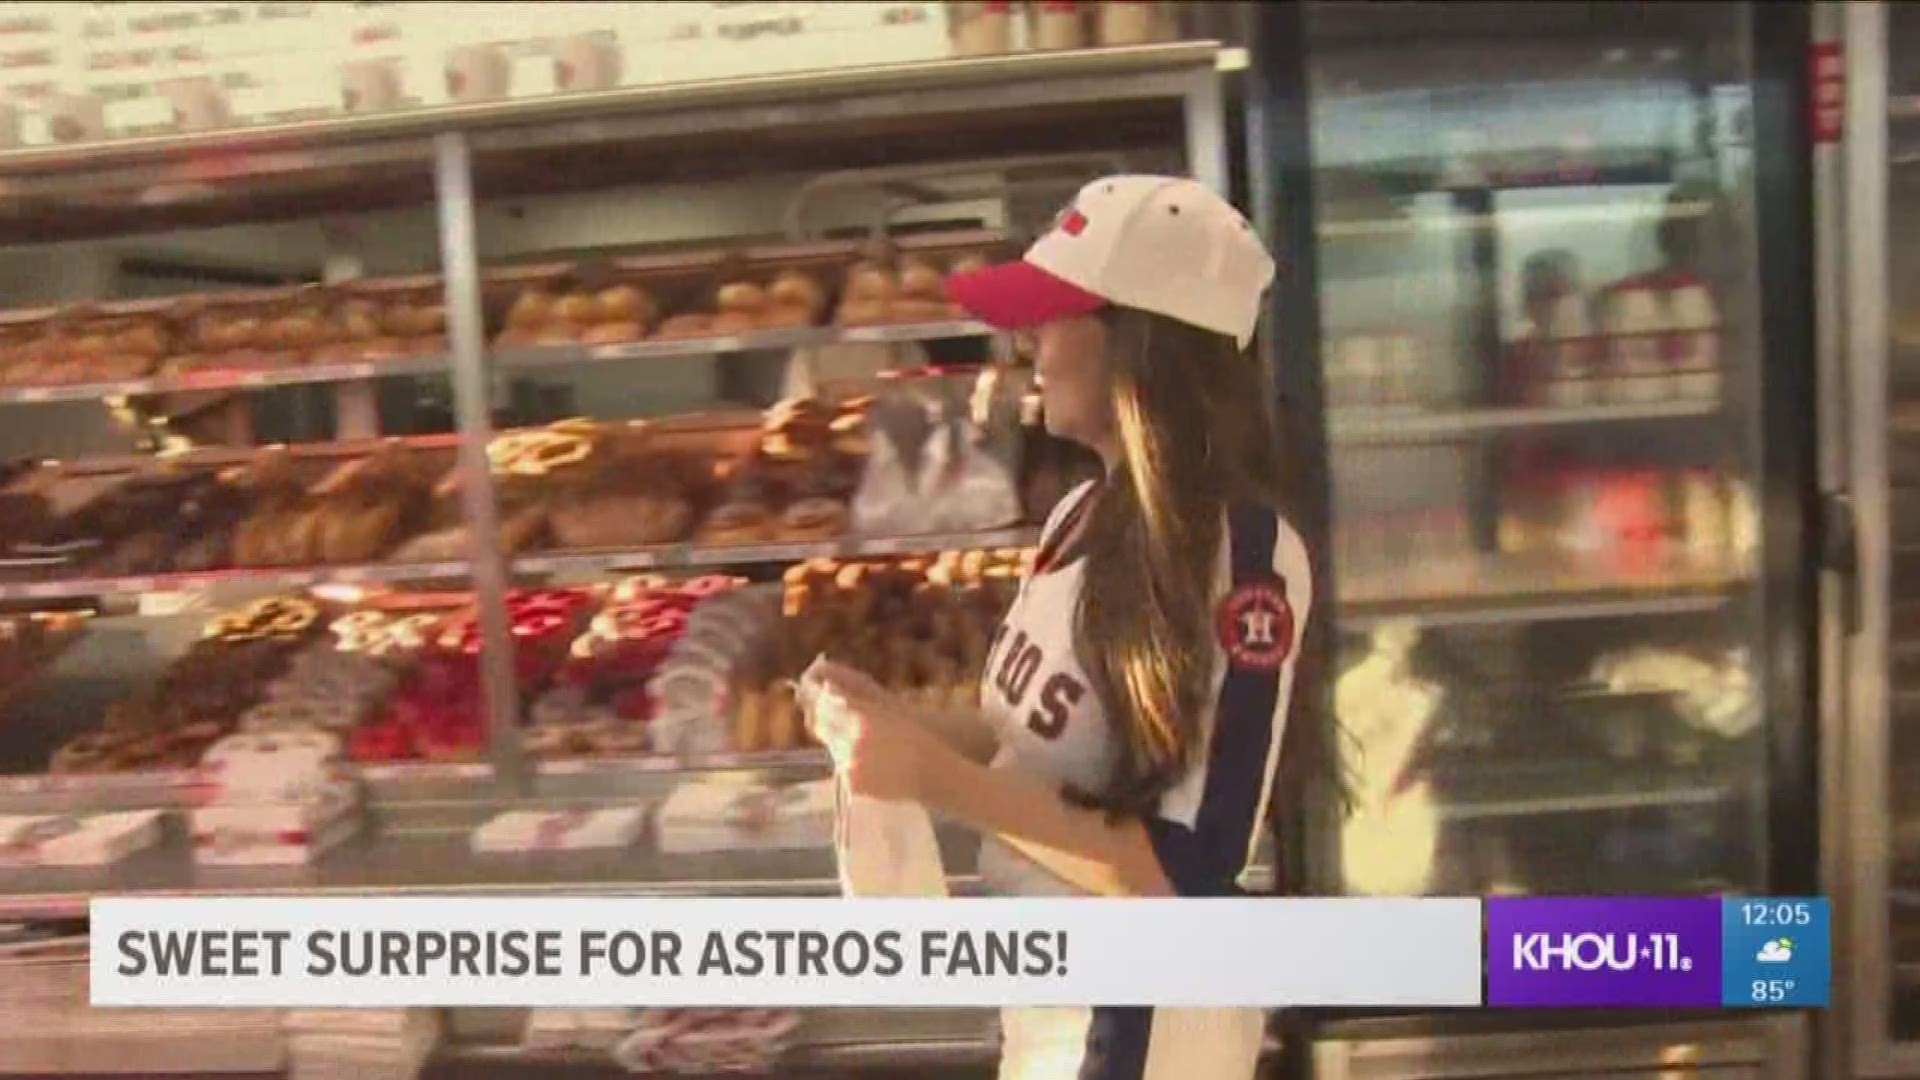 Some Astros fans got a sweet surprise Monday morning! The Astros Shooting Stars surprised customers at the Shipley's on Bissonnet, serving up the "Stro-Nuts," Astros-themed donuts.